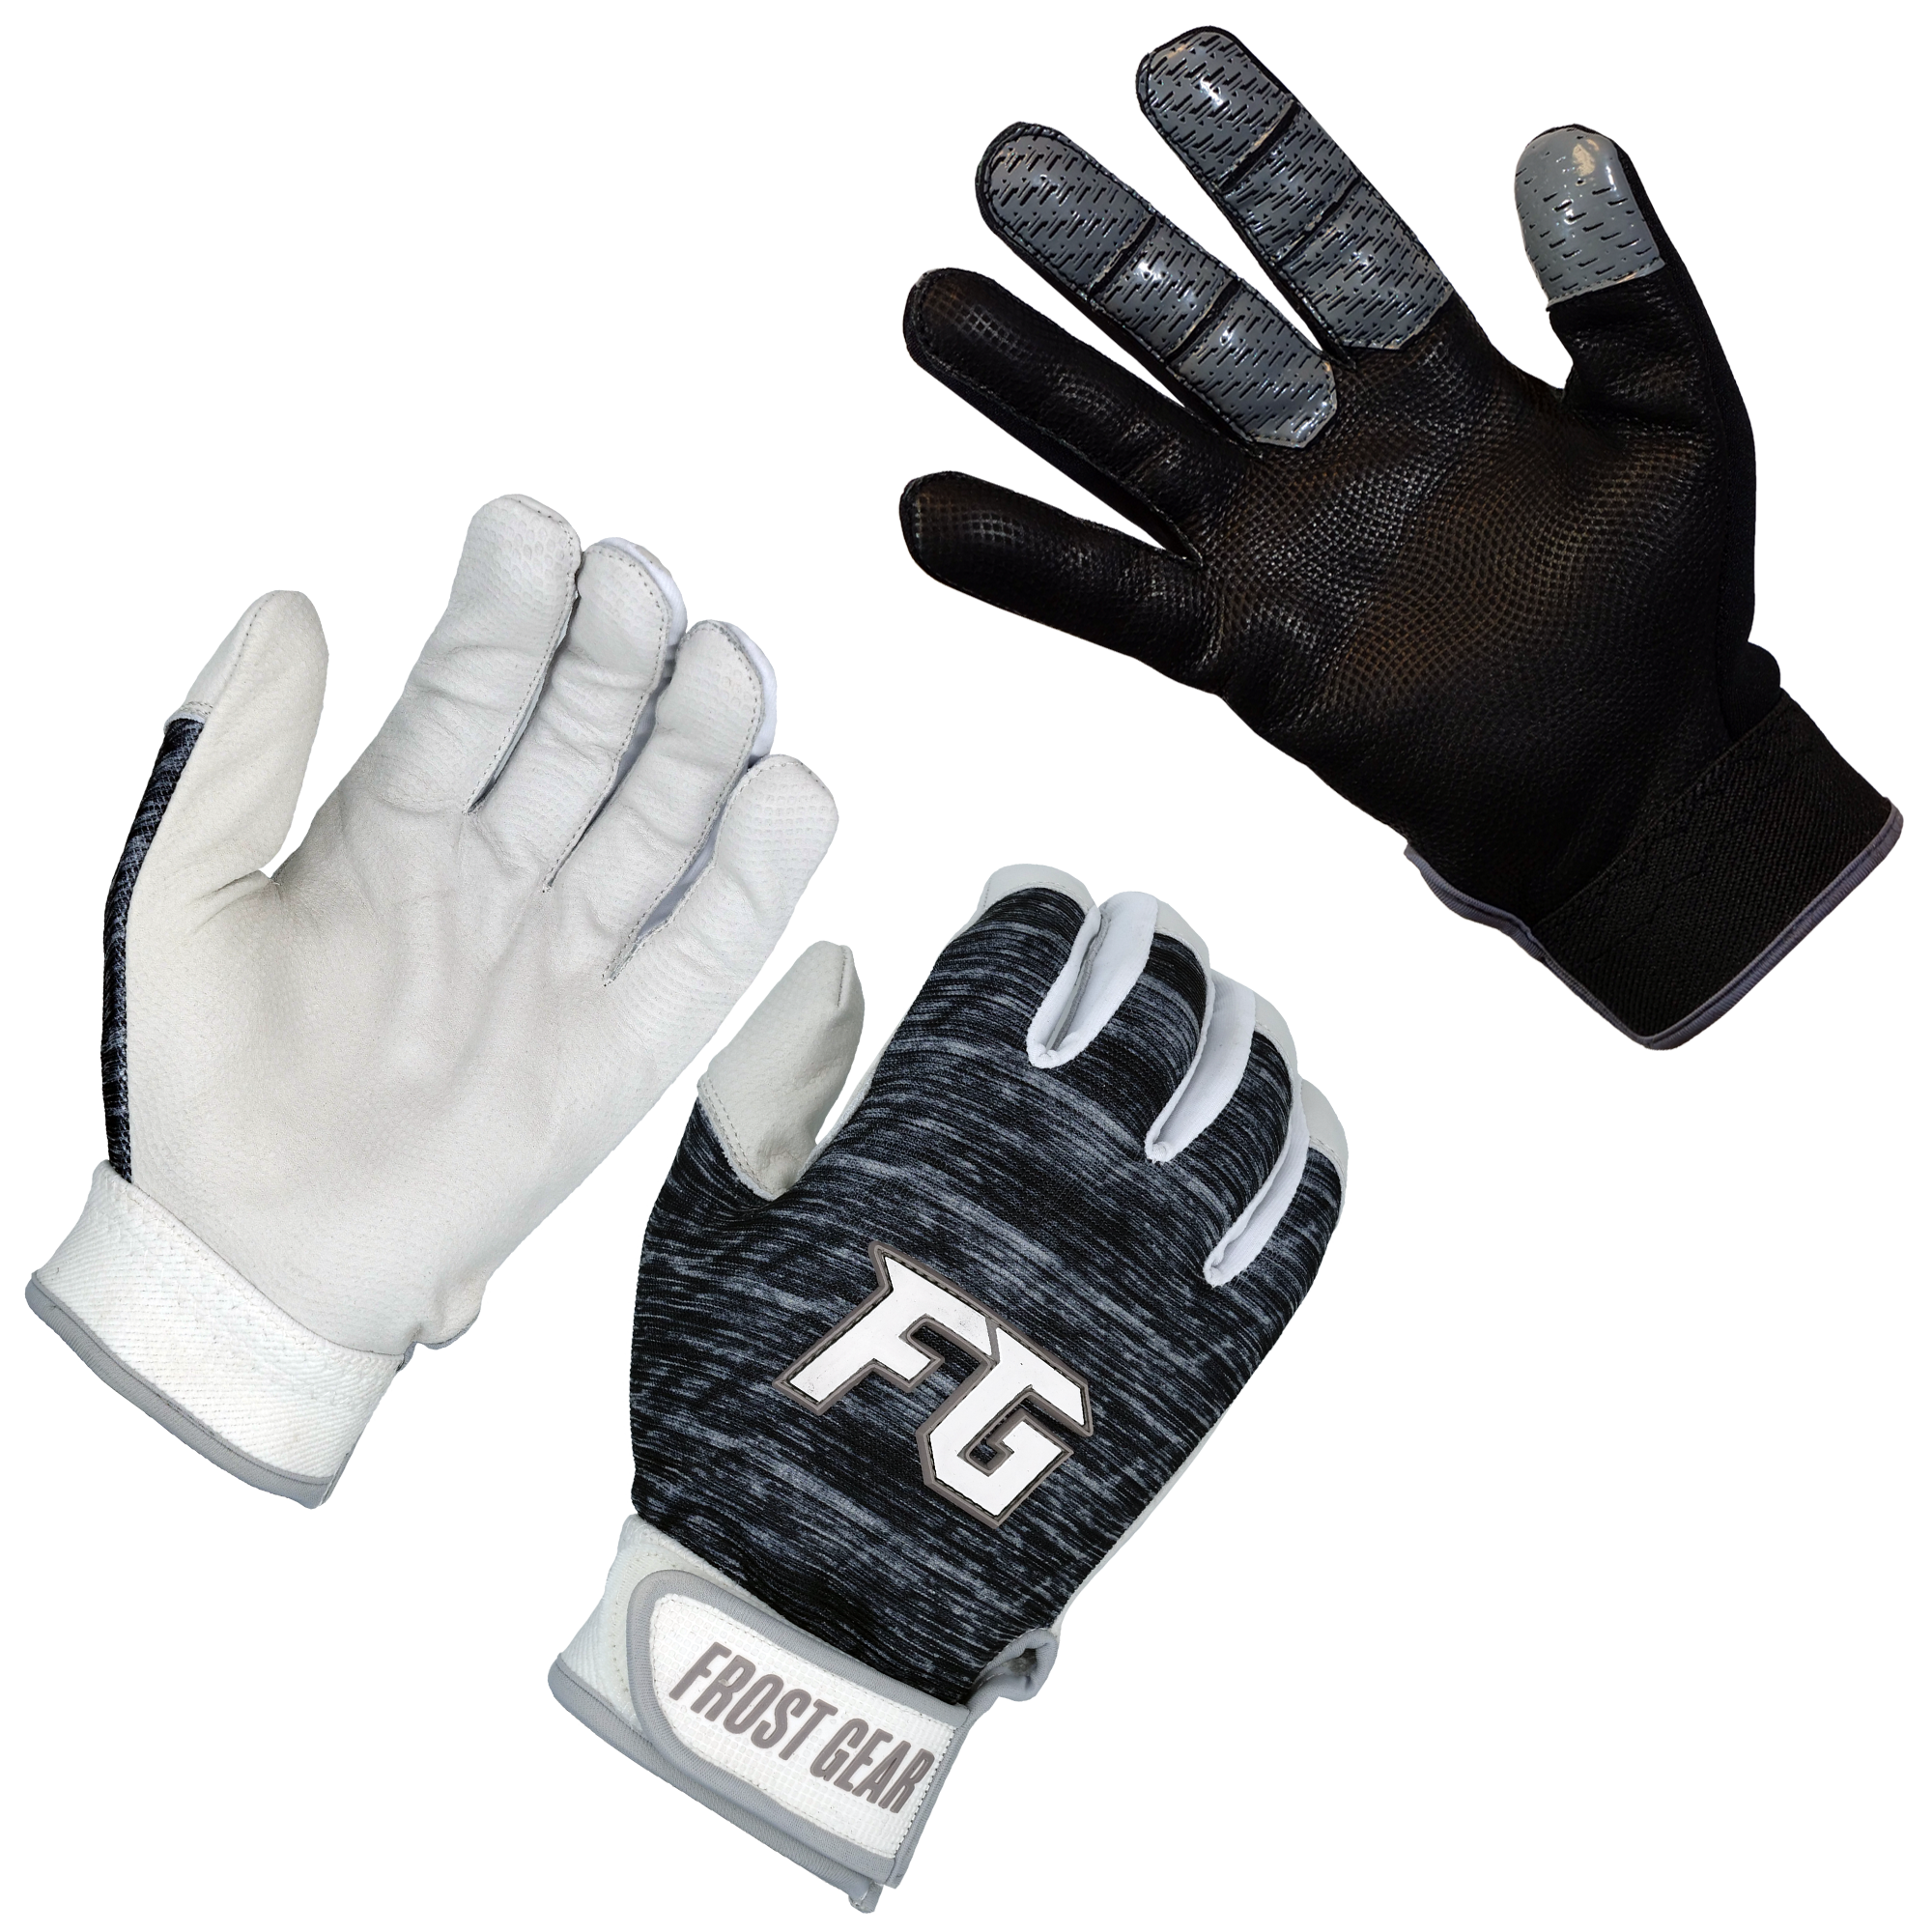 FG Package Deal: Baseball Throwing Glove & Pair of Batting Gloves